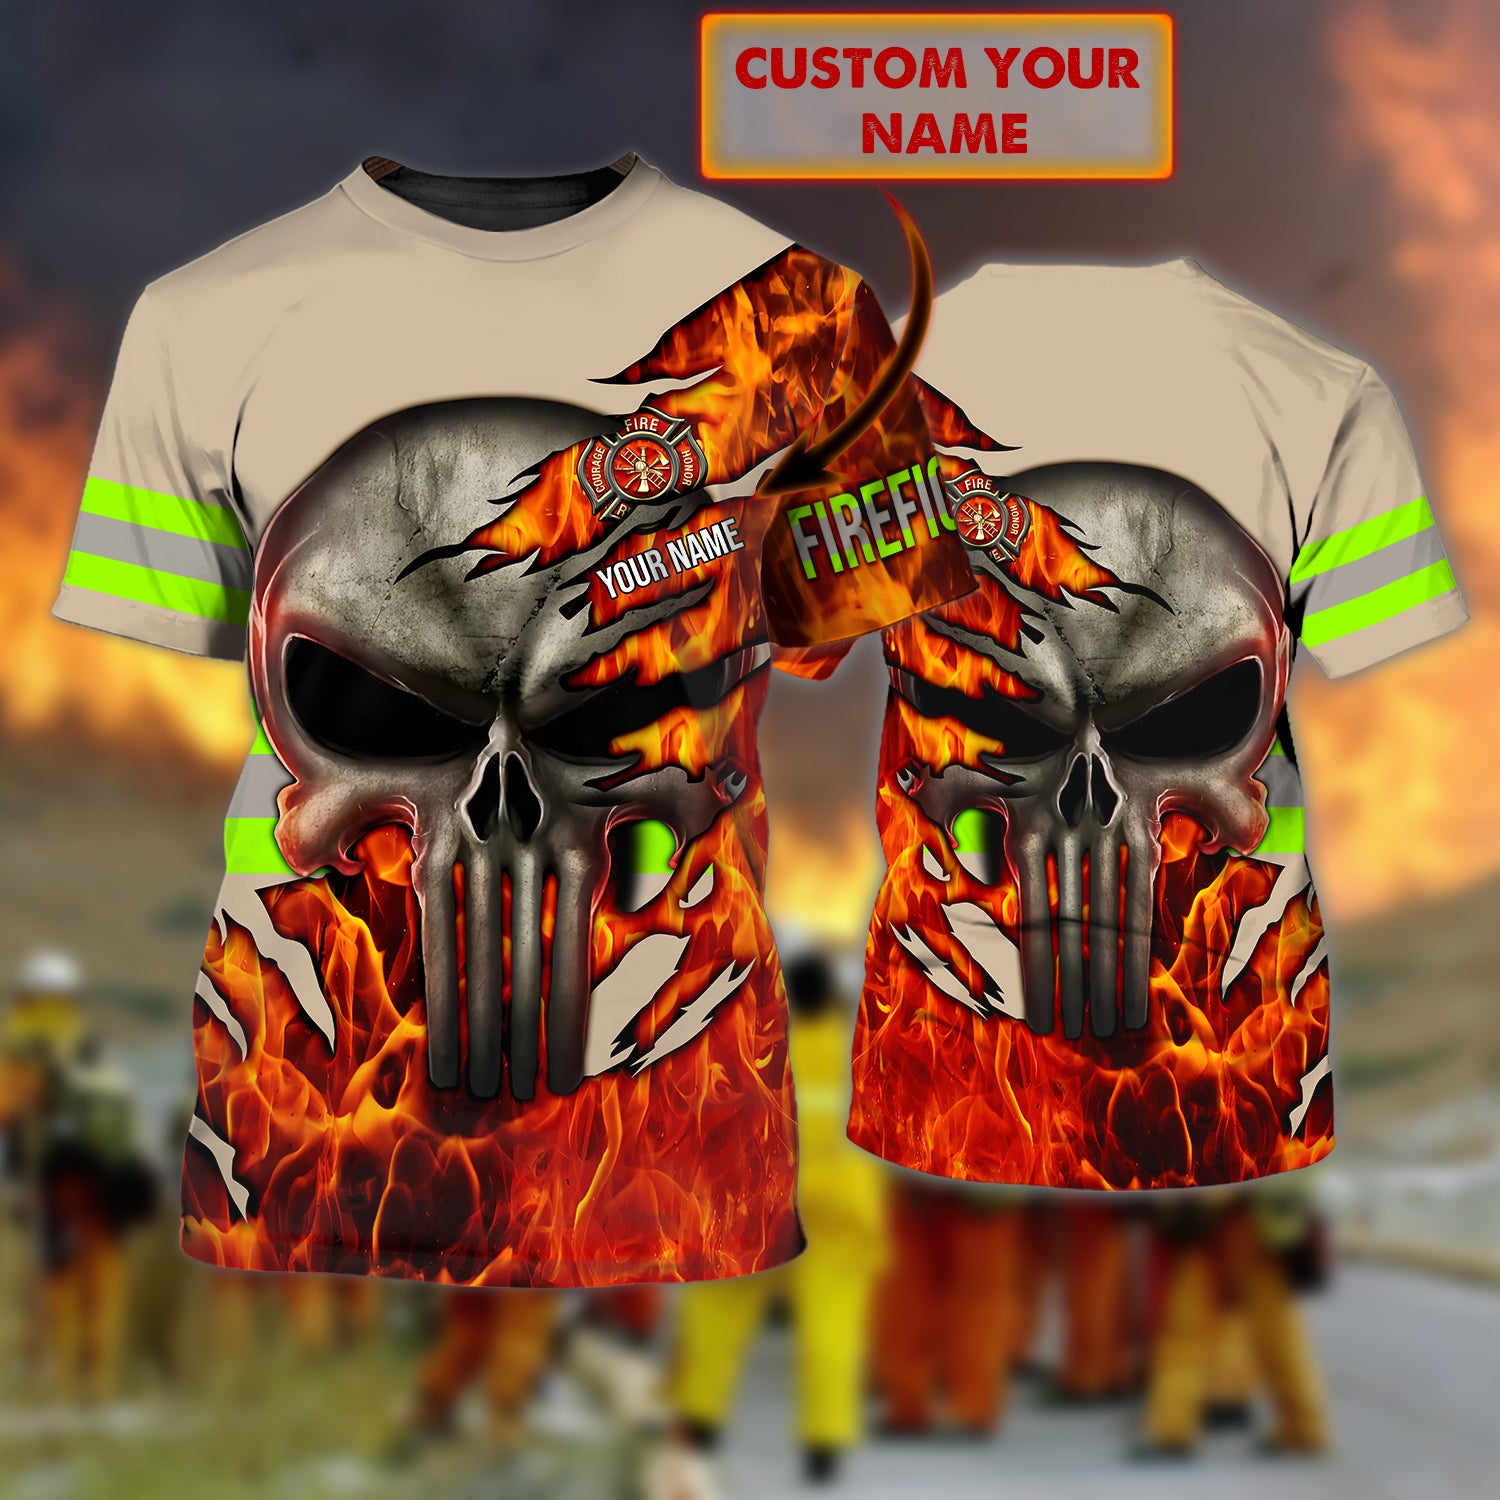 Firefighter - Personalized Name 3D Tshirt For firefighter - HEZ98 21